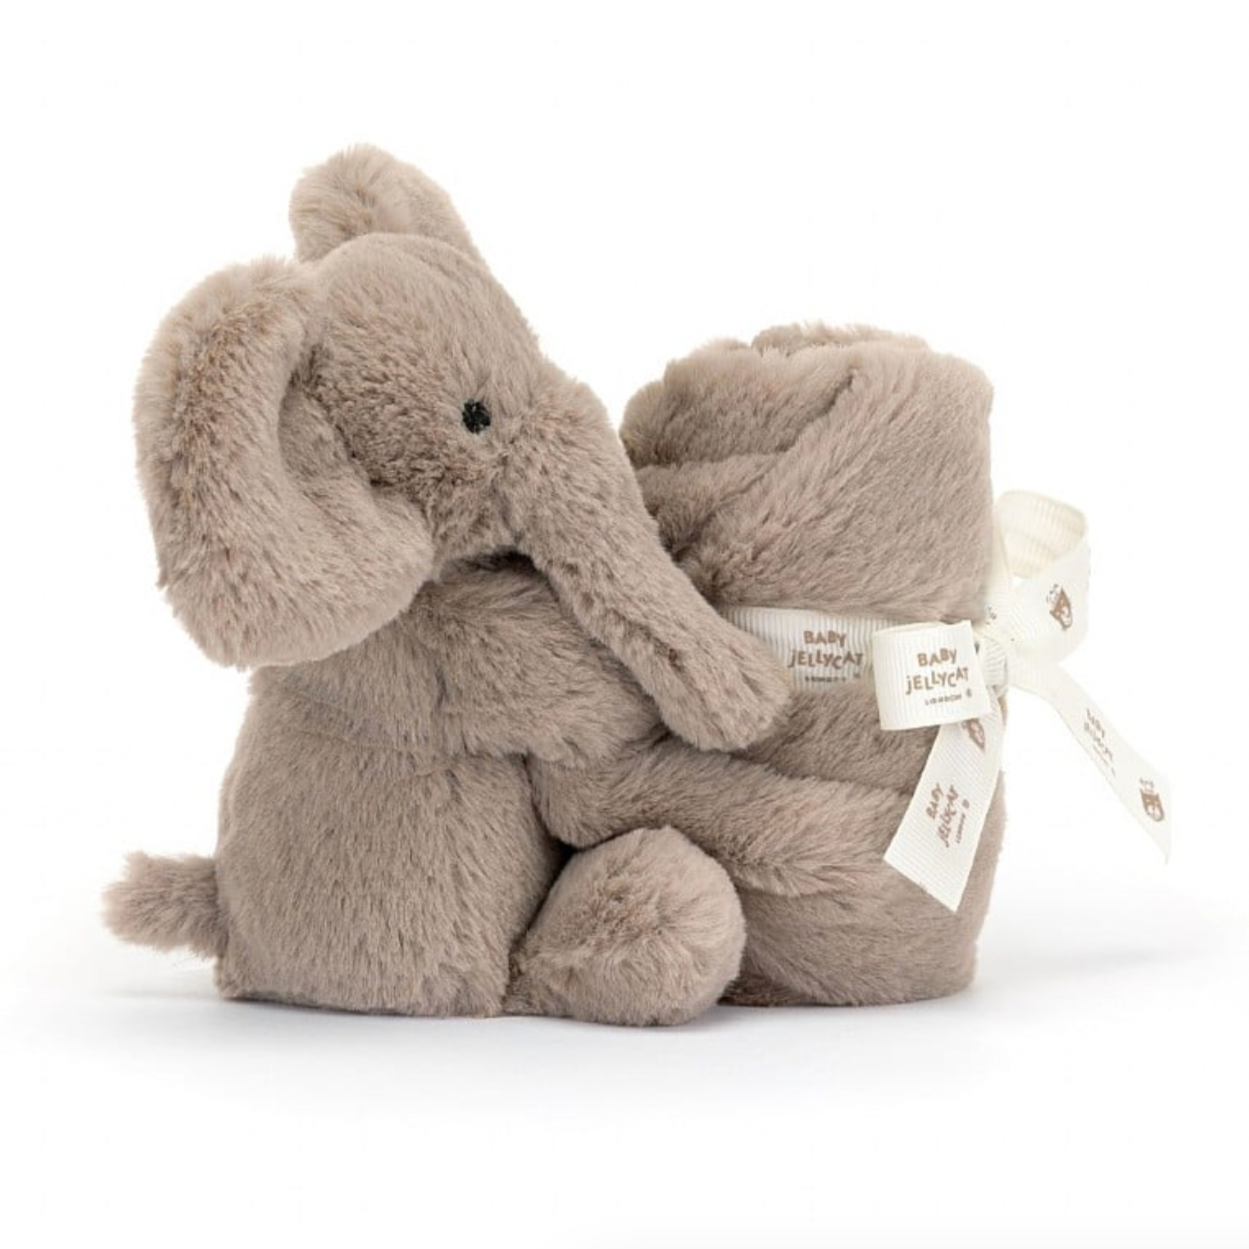 Jellycat Smudge Elephant Soother Lovie in GIft Box